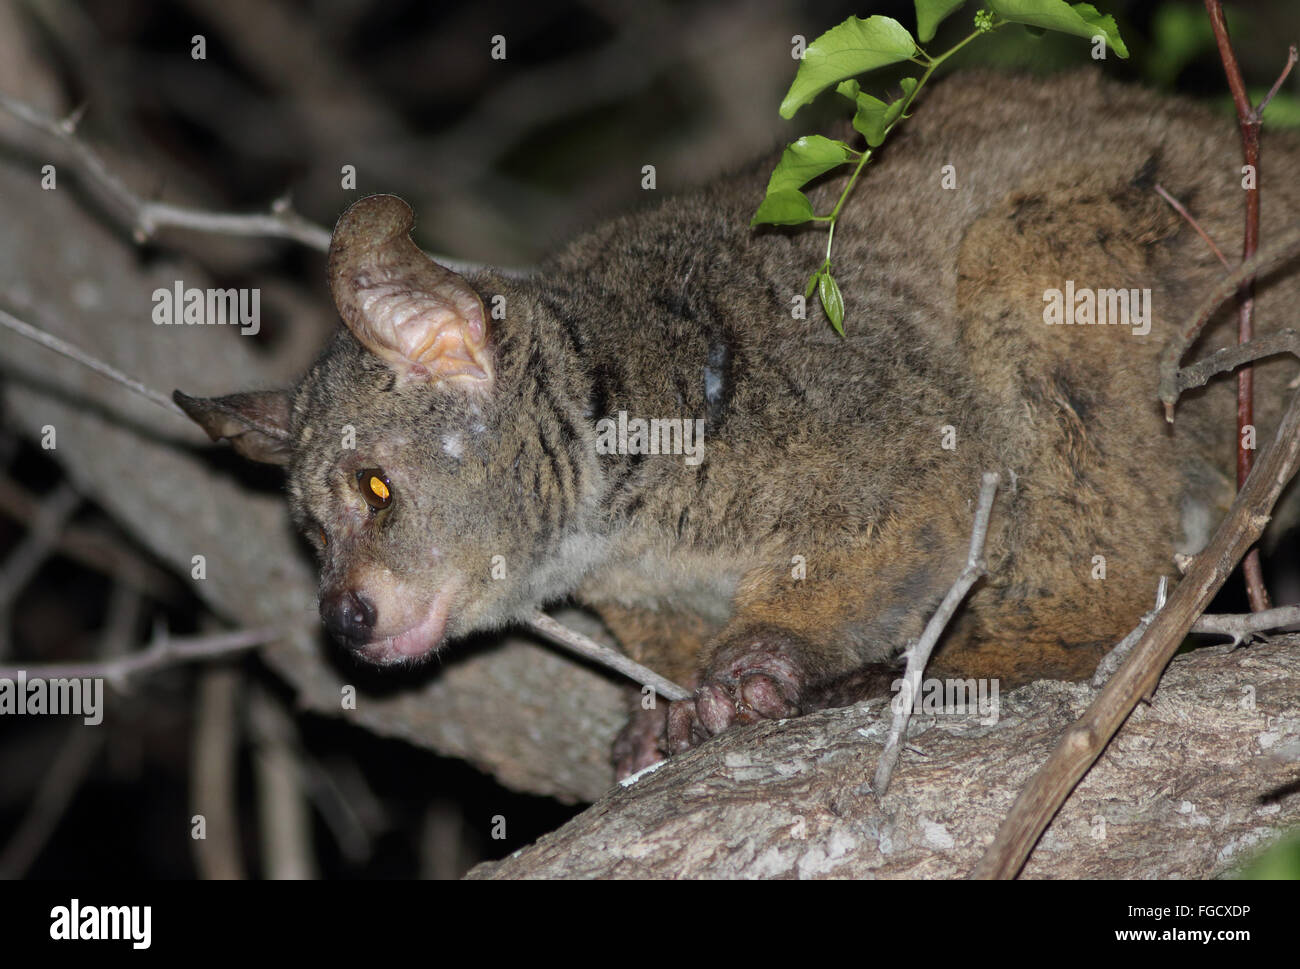 Brown Greater Galago (Otolemur crassicaudatus) adult, with skin condition, sitting on branch at night, Kruger N.P., Great Limpopo Transfrontier Park, South Africa, November Stock Photo